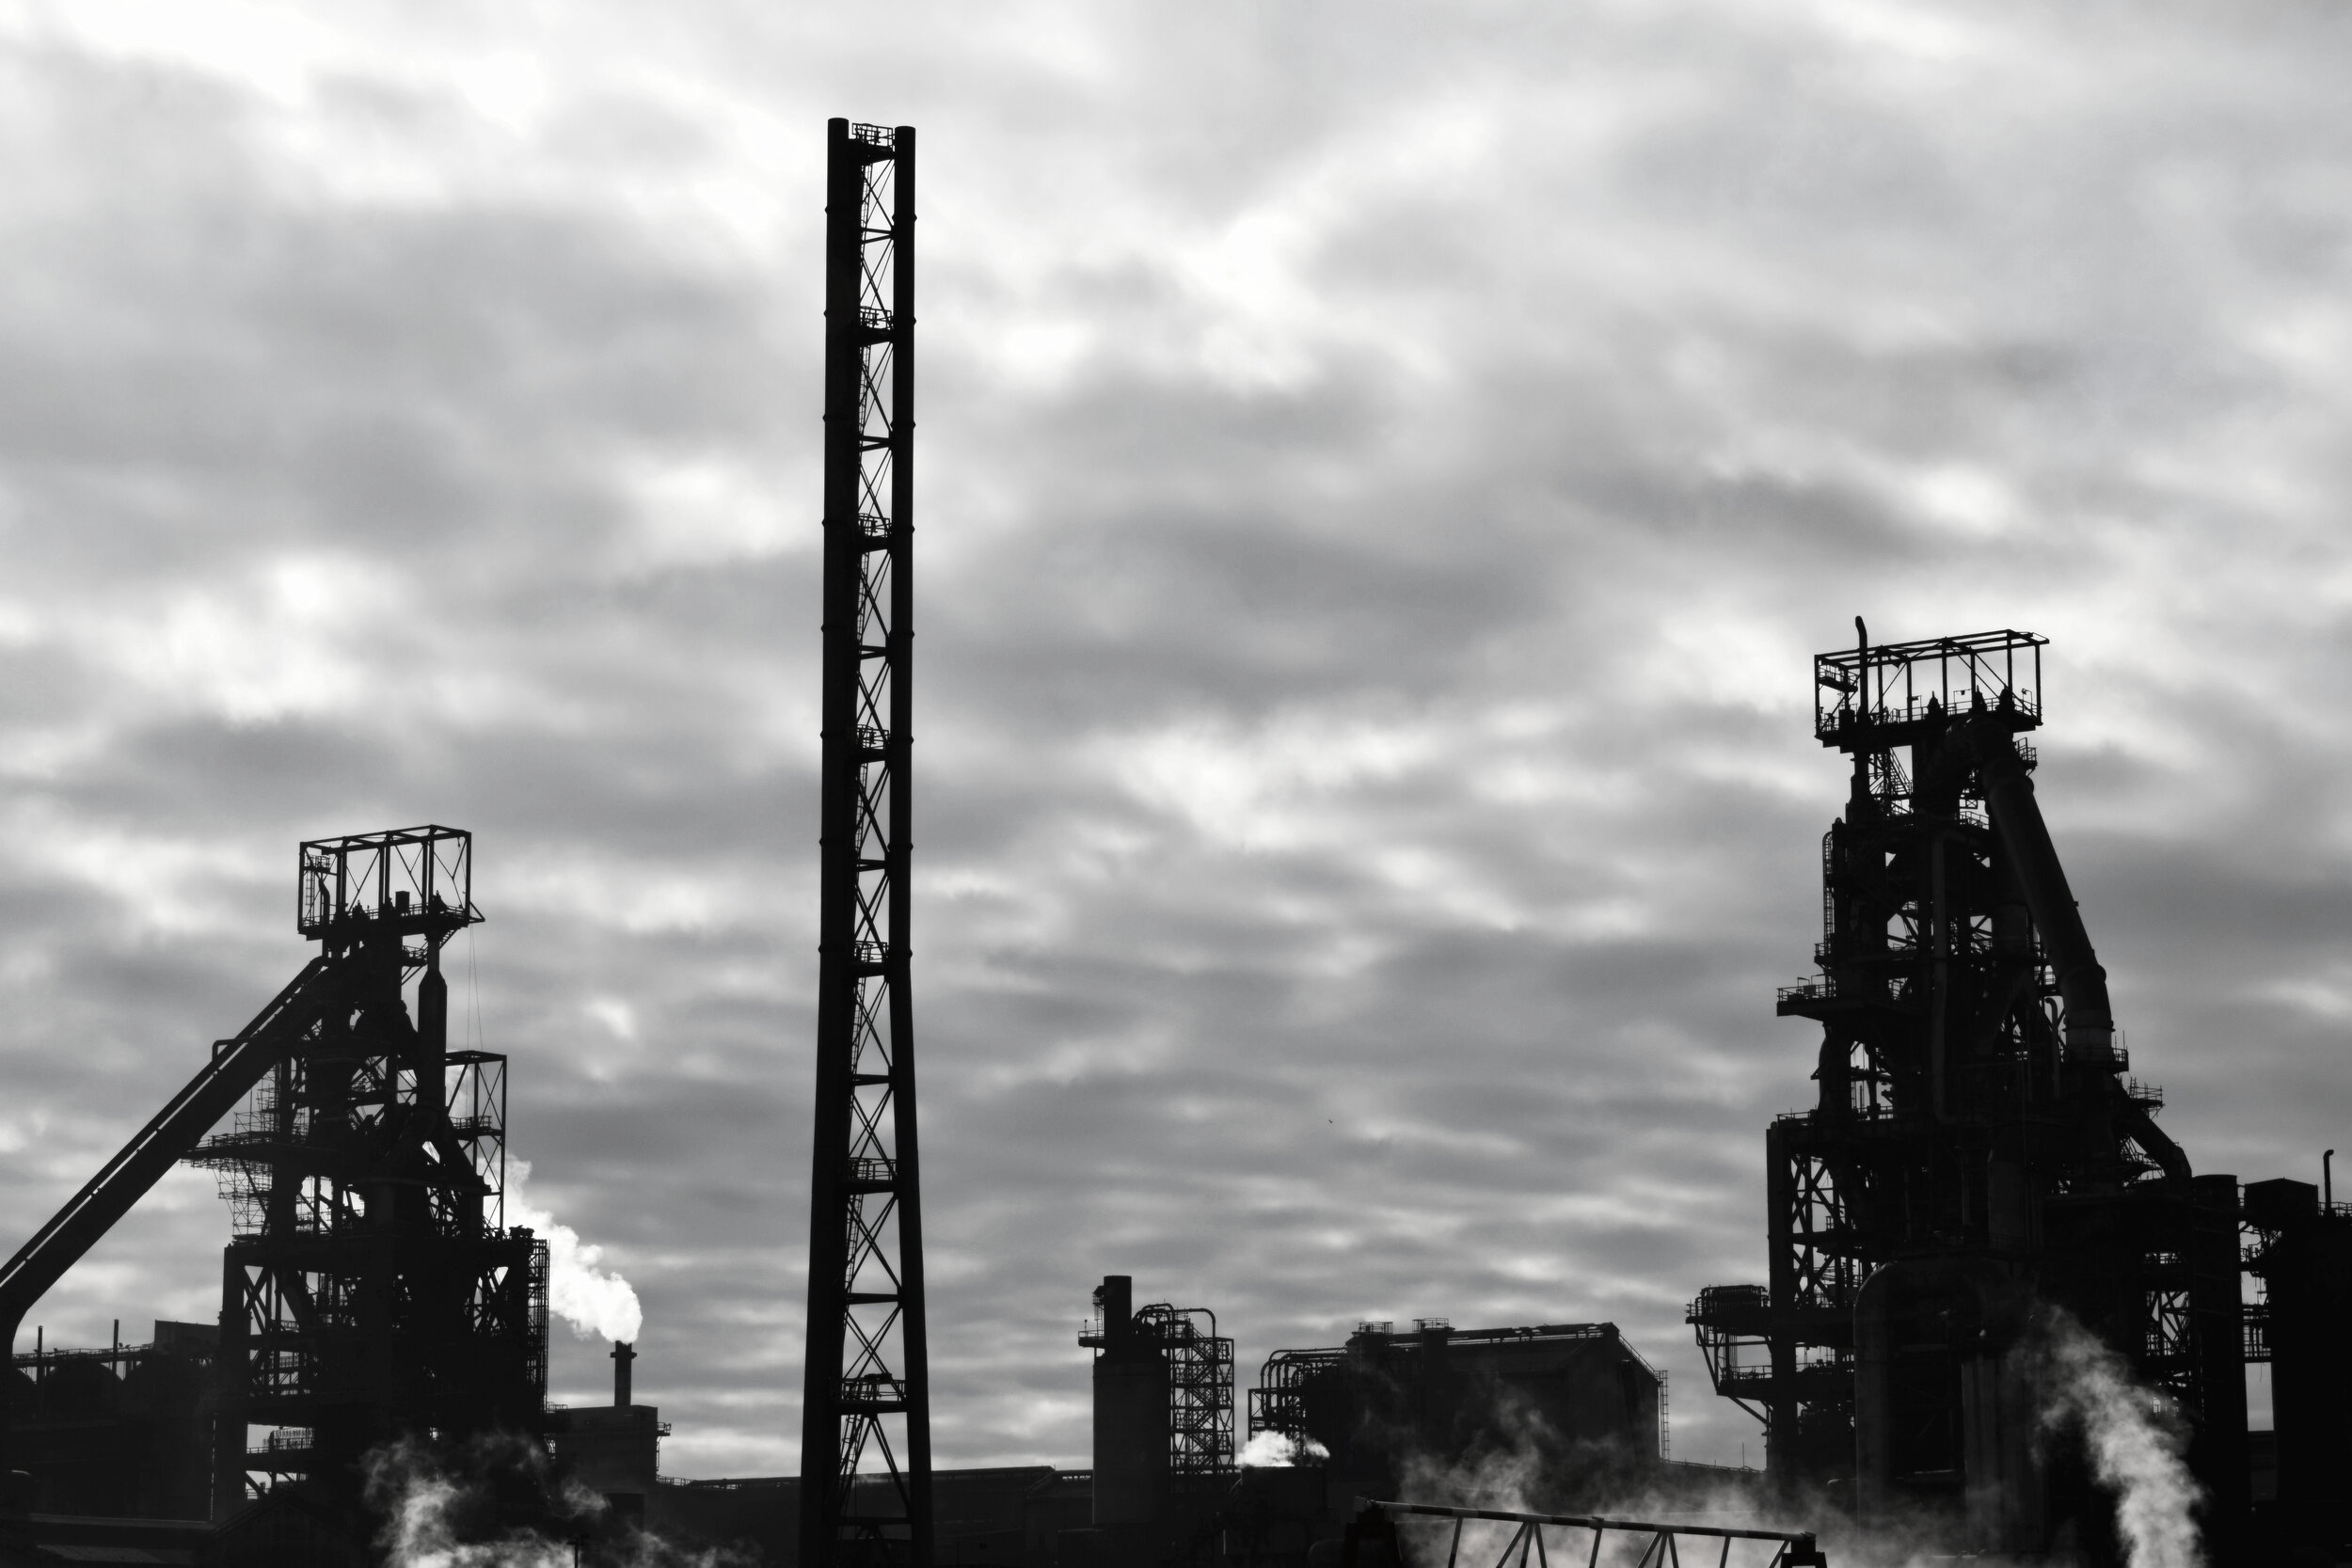 The blast furnaces of the Steelworks plant are a prominent part of the landscape of Port Talbot. Port Talbot has suffered from globalization since the hub was privatized in 1988. 